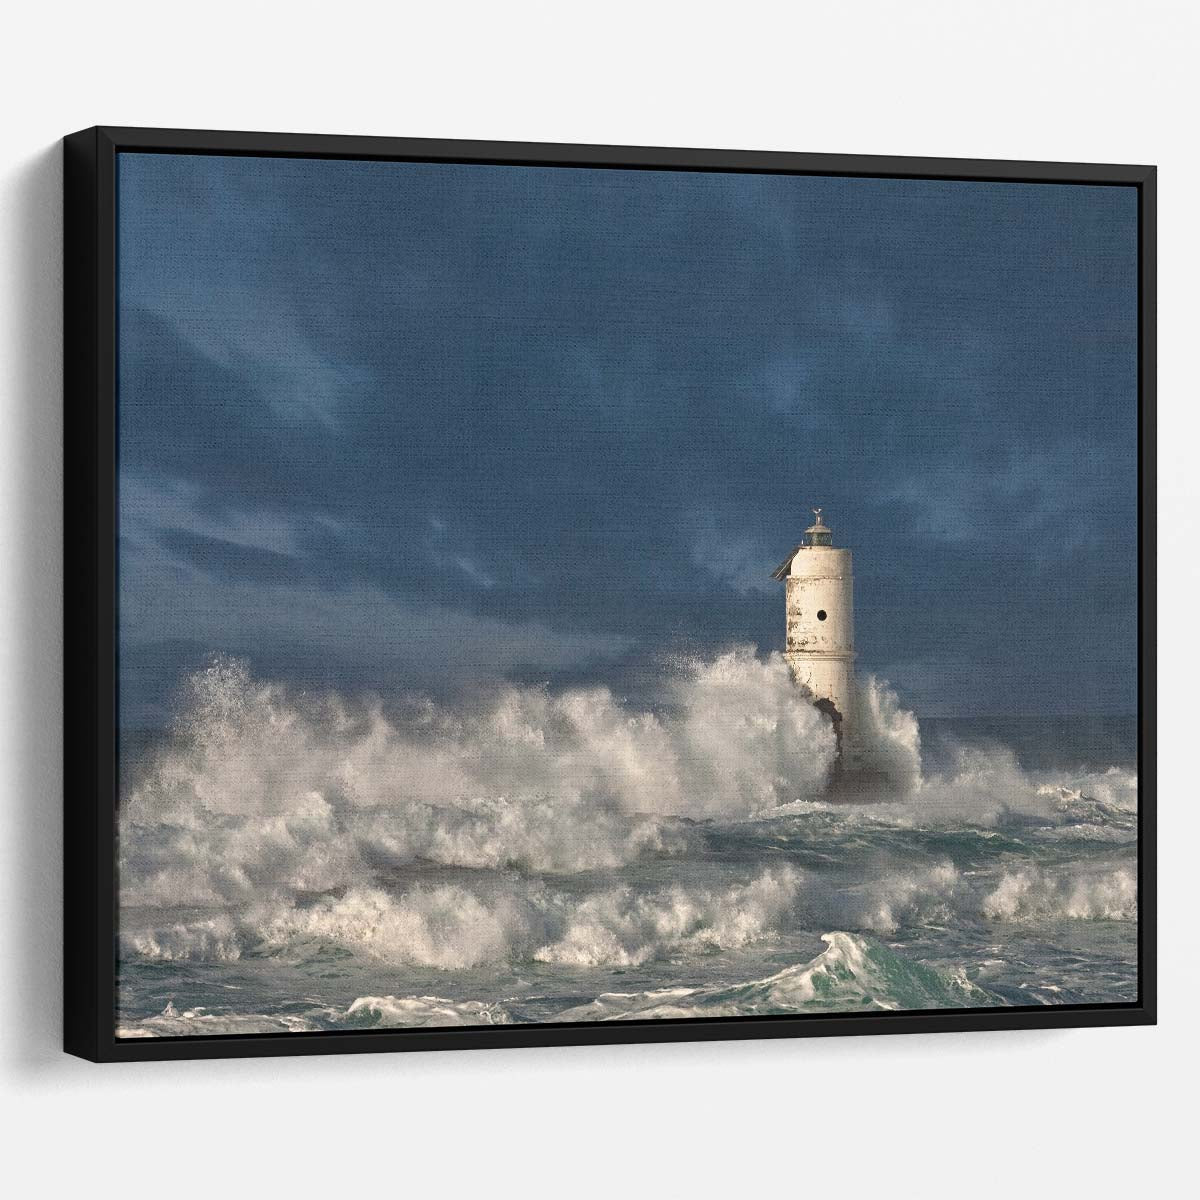 Mangiabarche Sardinia Lighthouse Seascape Storm Wall Art by Luxuriance Designs. Made in USA.